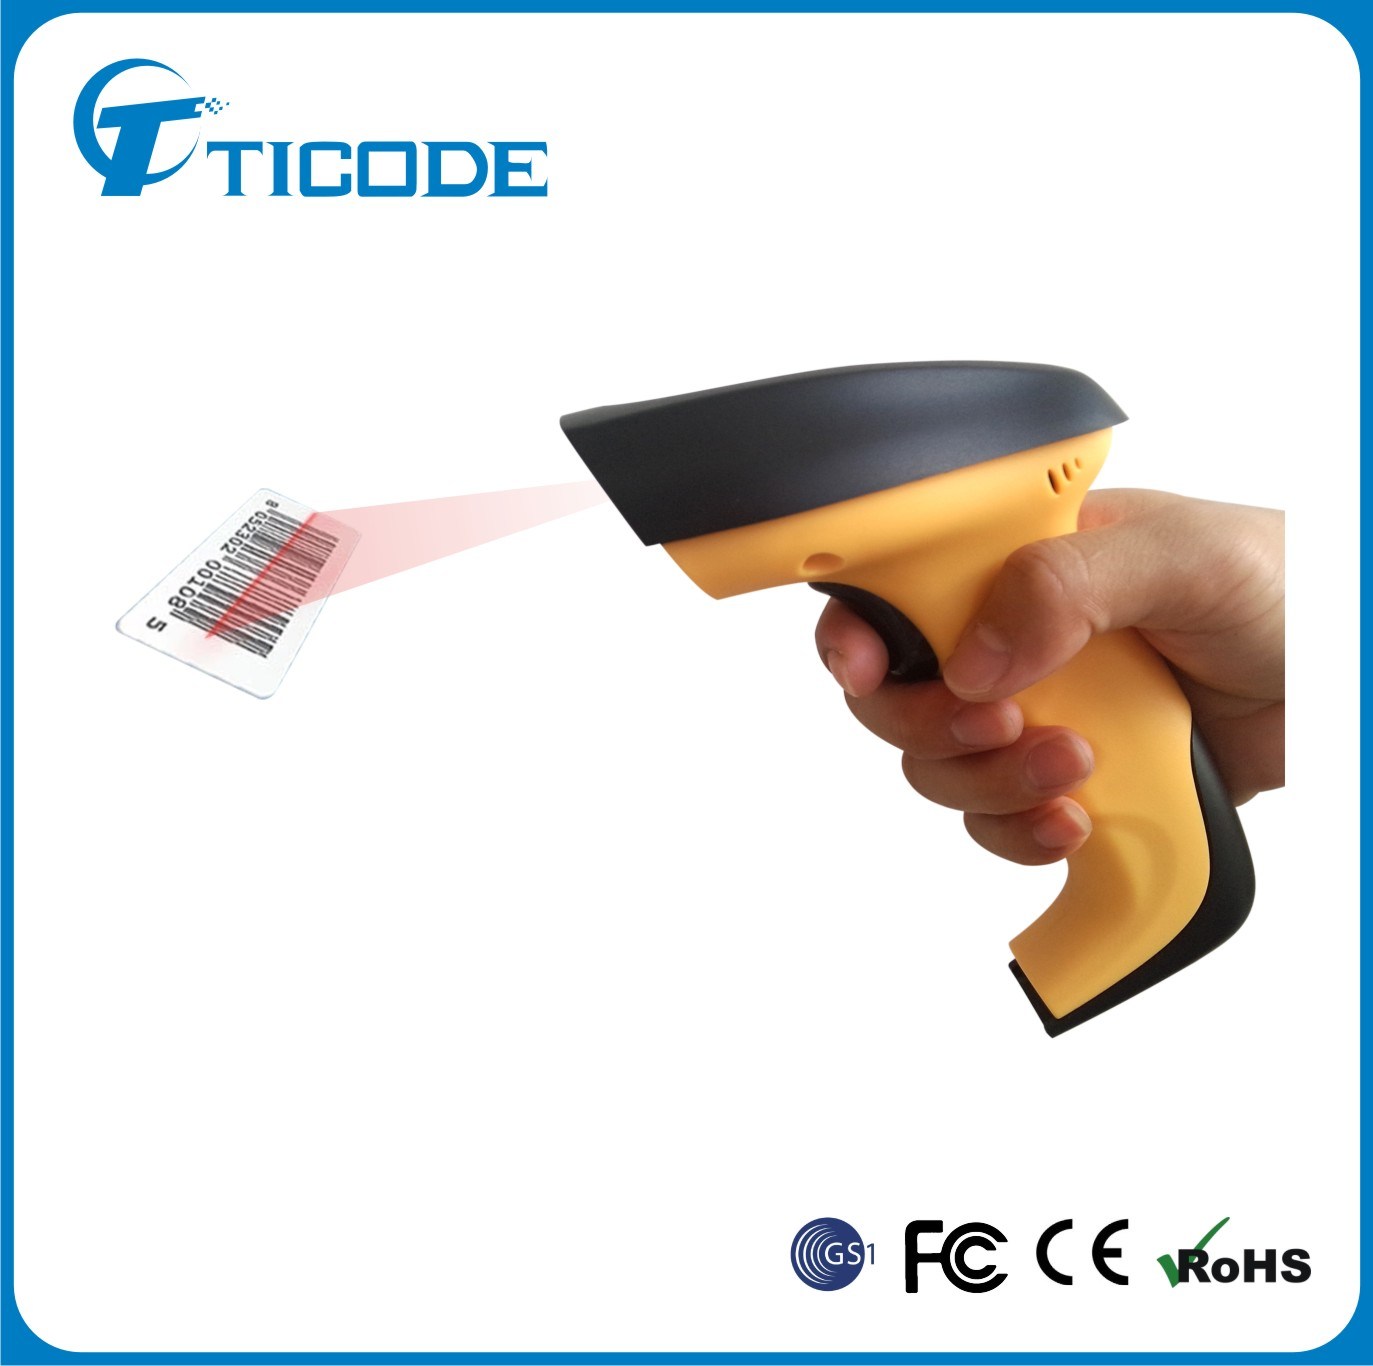 Laser Barcode Scanner China Factory Price (TS2400)